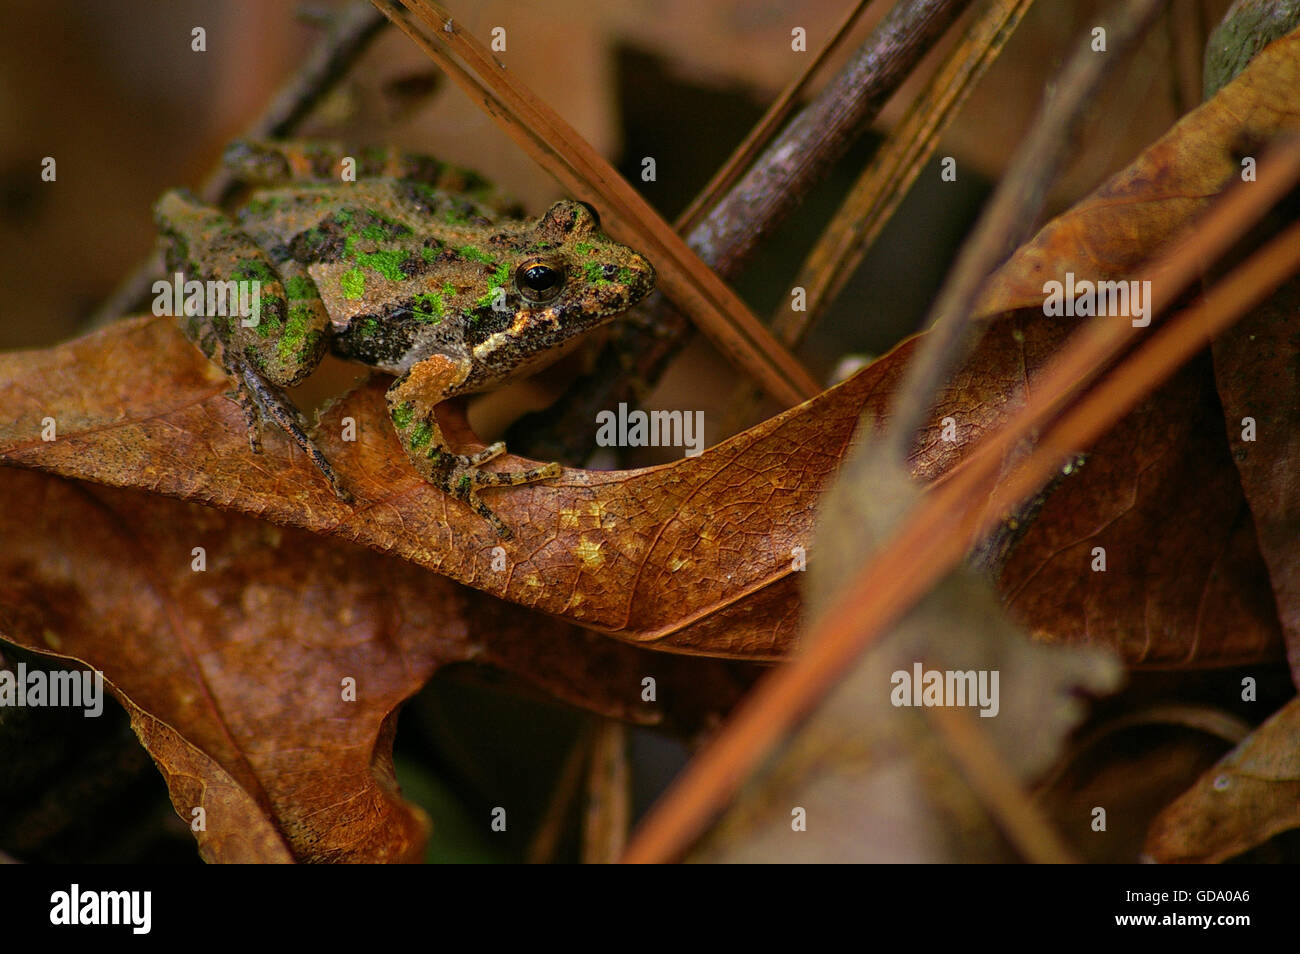 Southern cricket frog Stock Photo